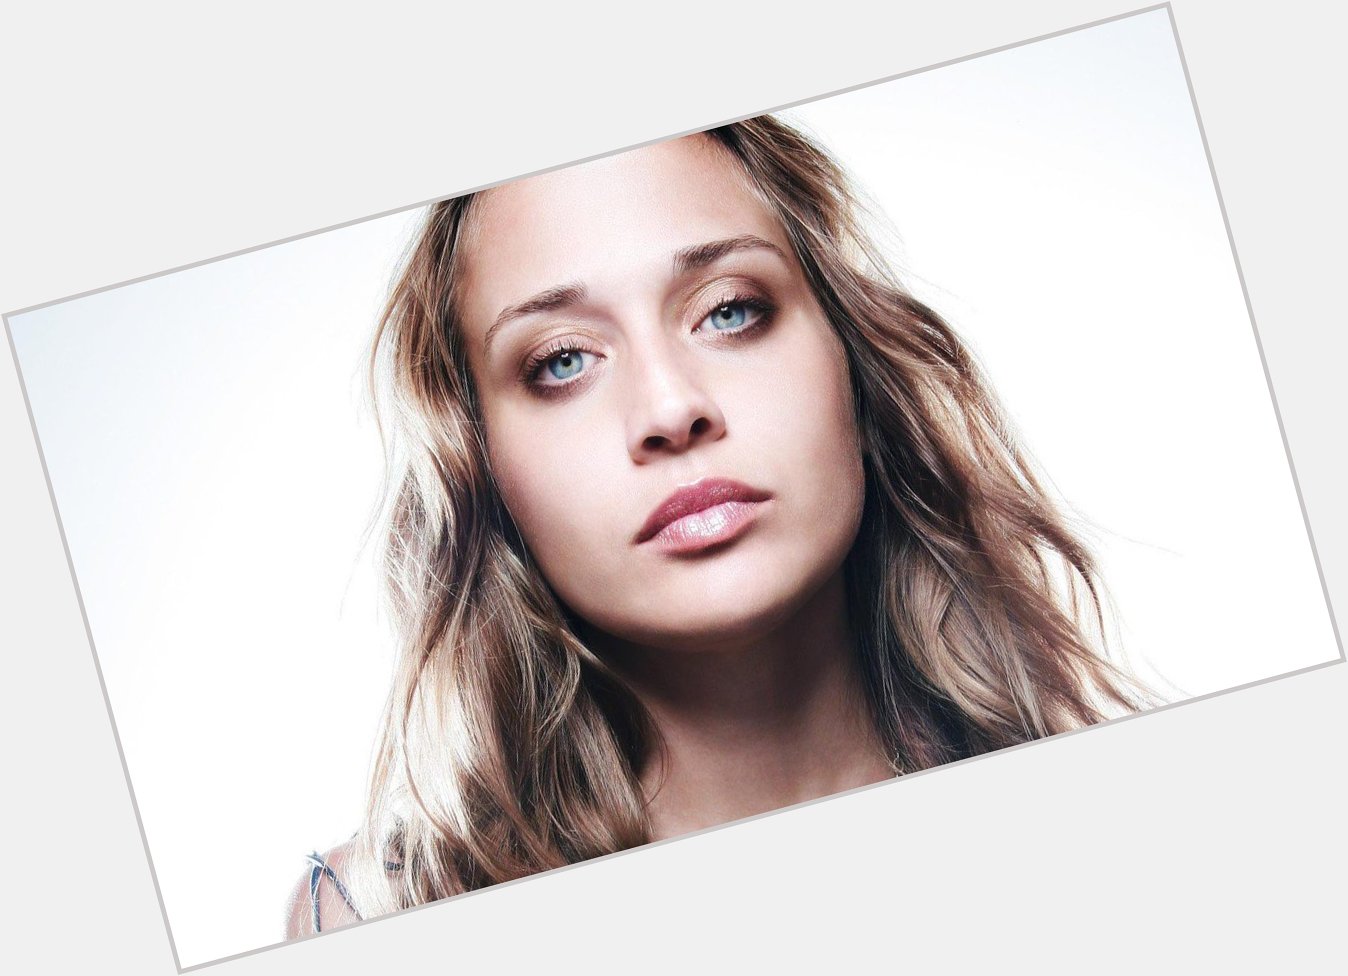 Wishing a happy 42nd birthday to Criminal singer Fiona Apple!   